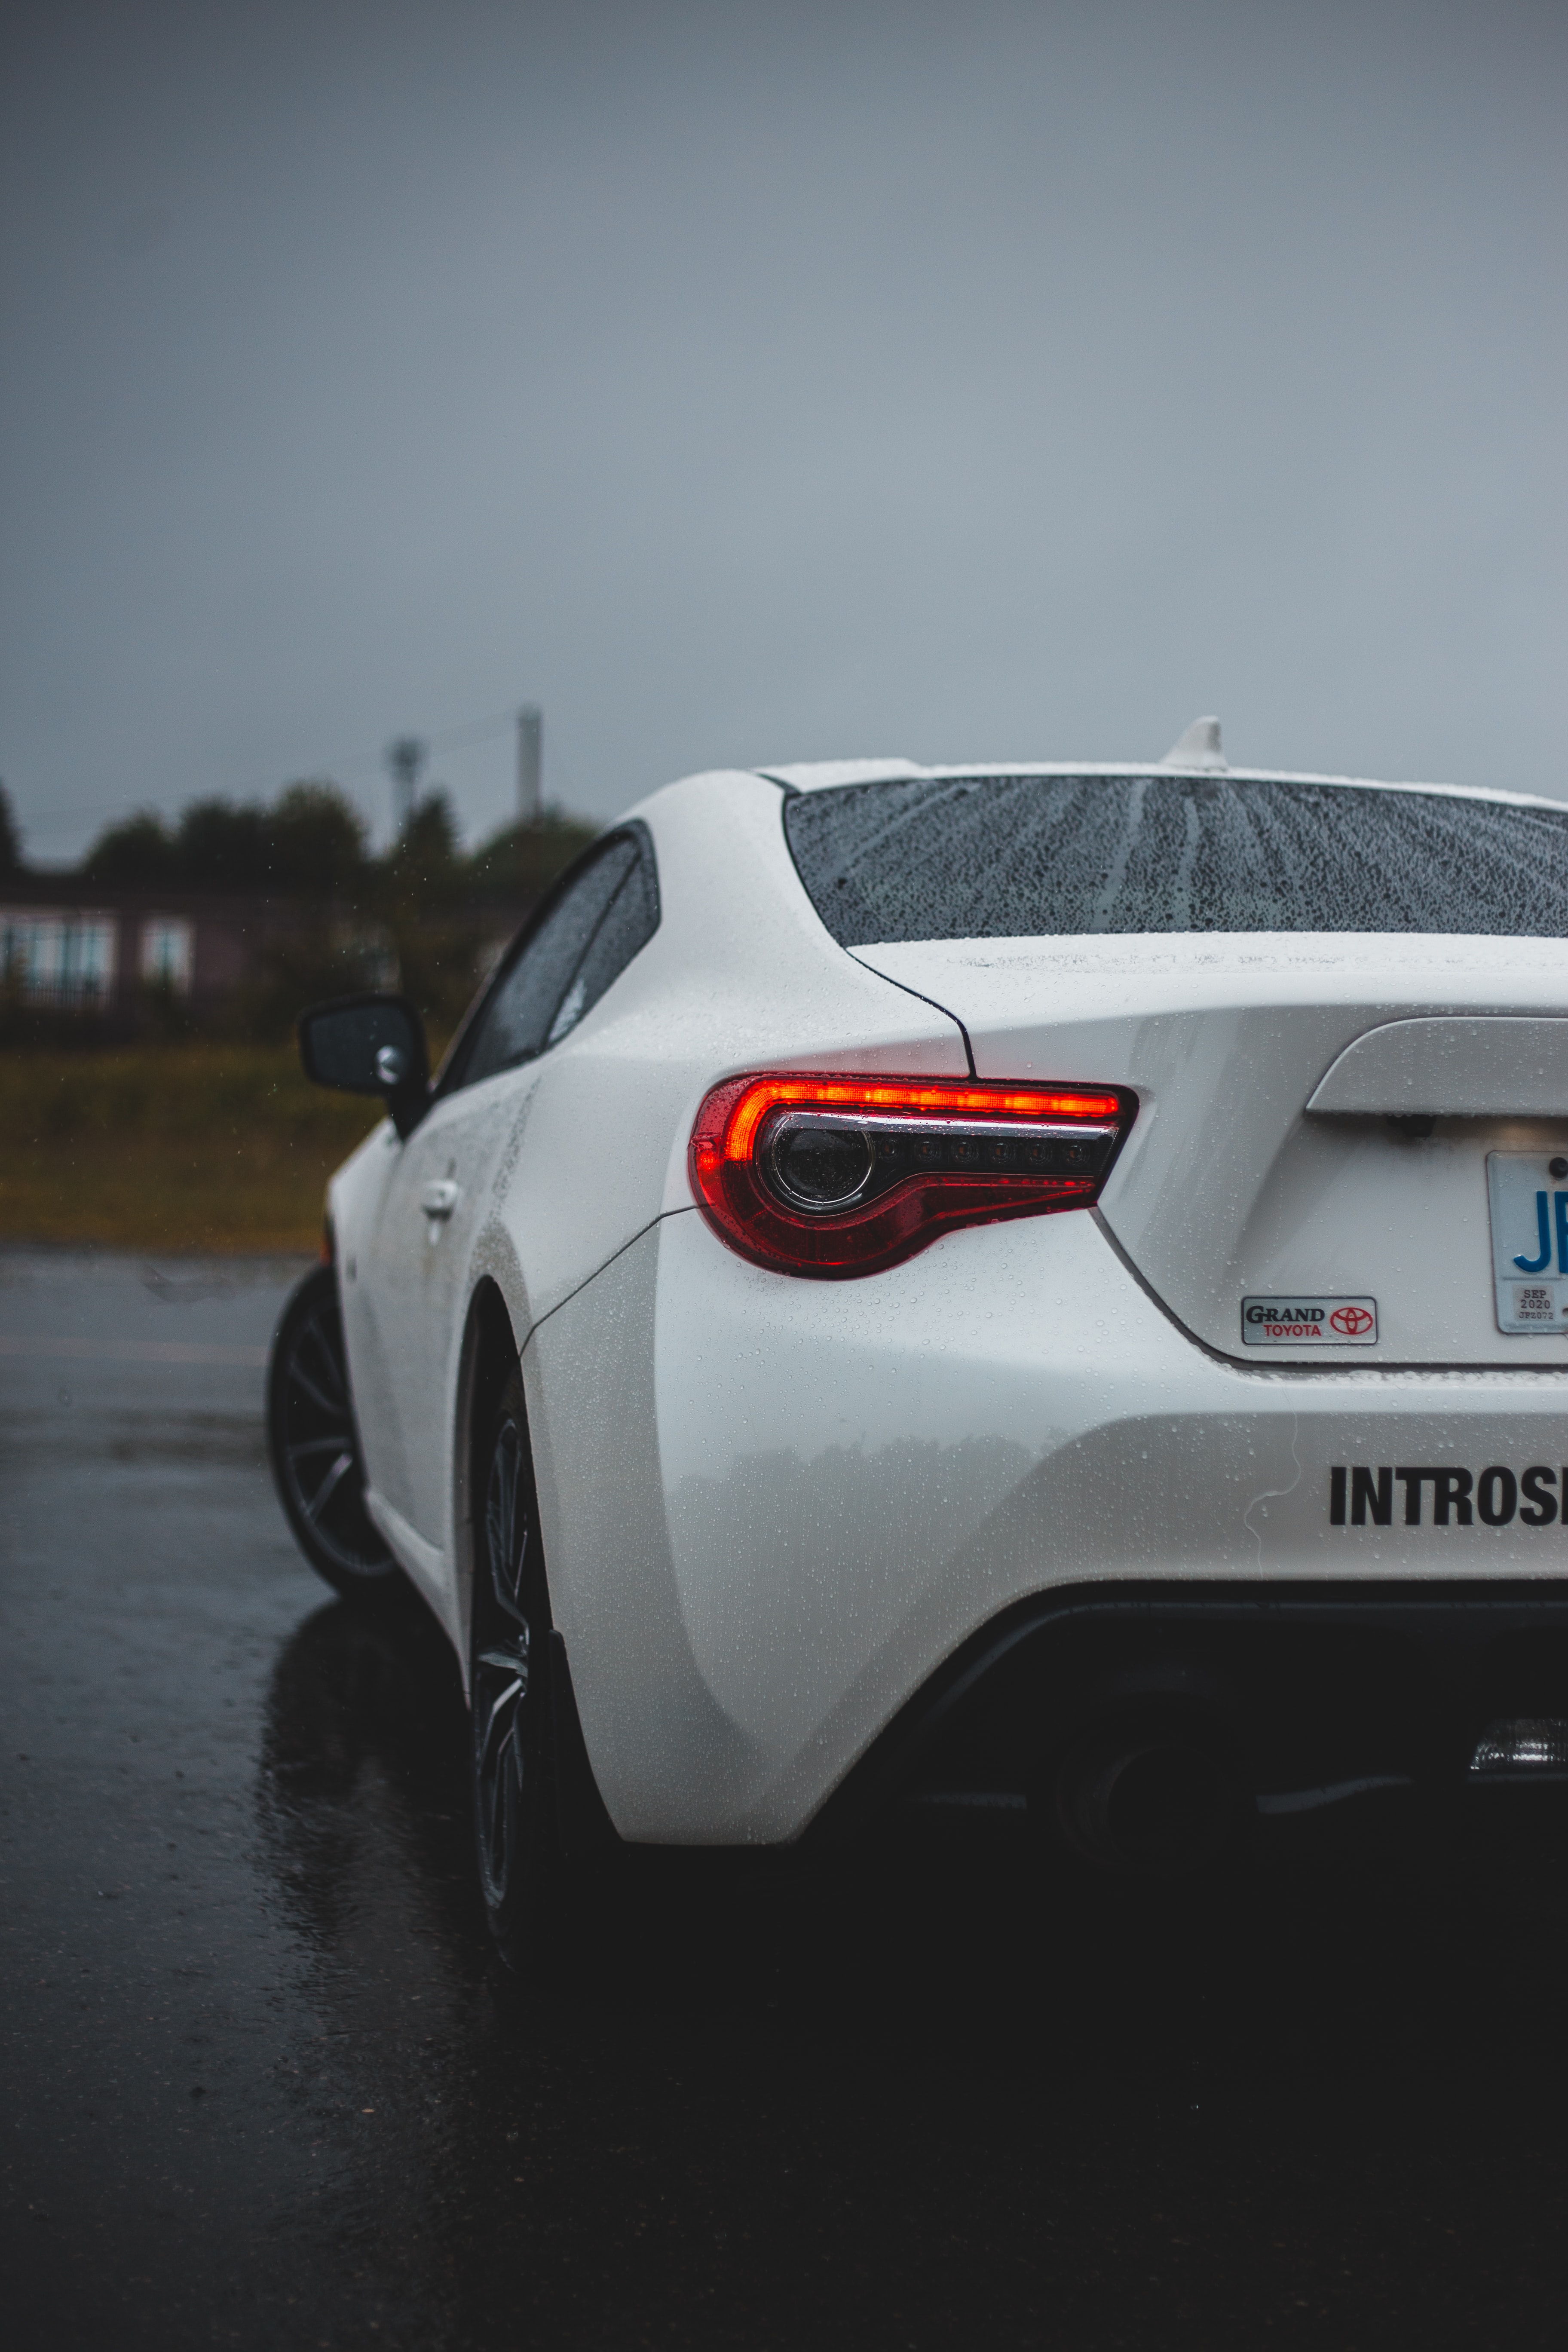 cars, car, back view, white collection of HD images